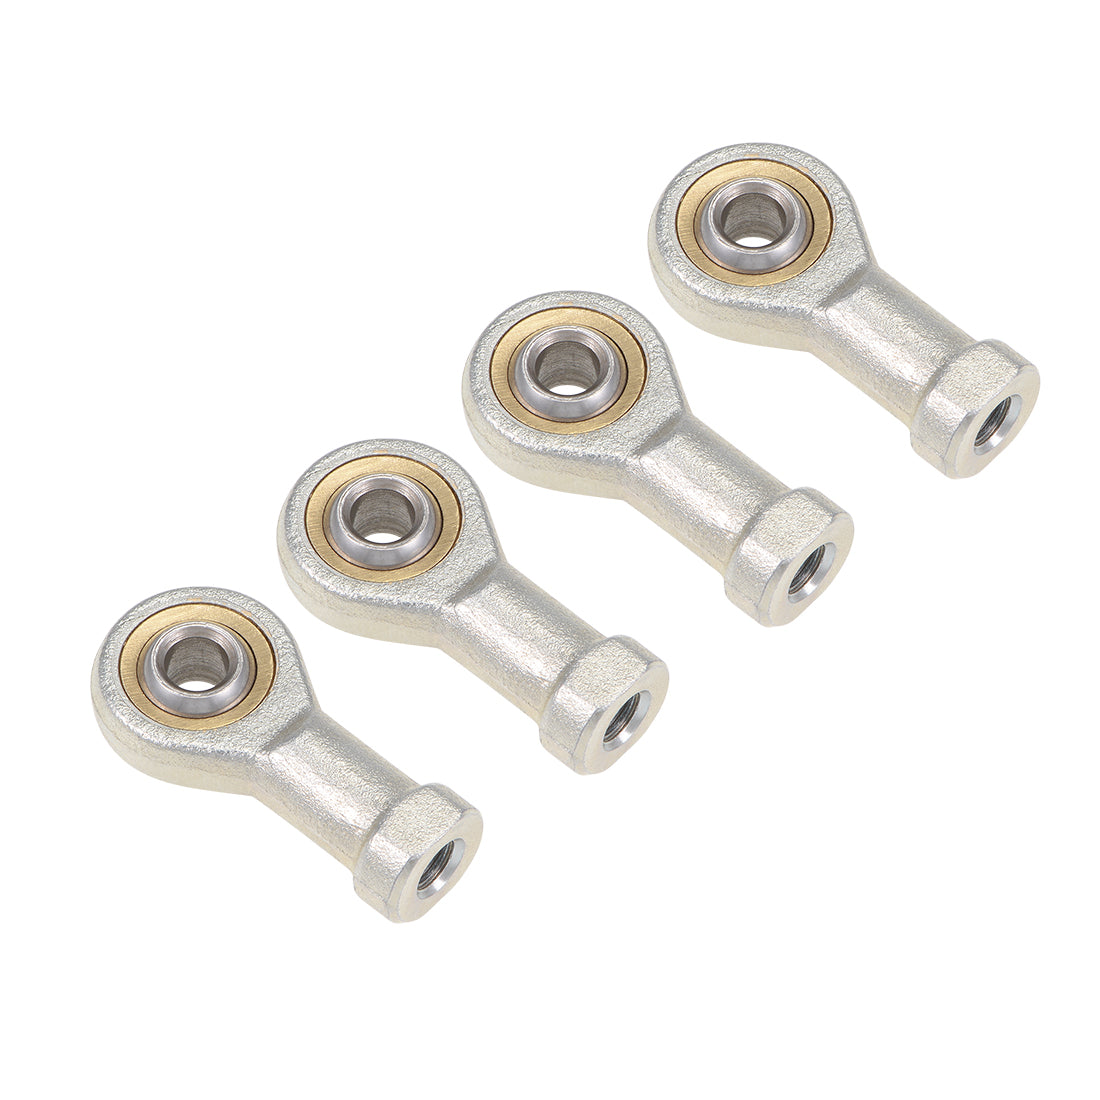 uxcell Uxcell 6mm Rod End Bearing M6x1.0mm Rod Ends Ball Joint Female Right Hand Thread 4pcs